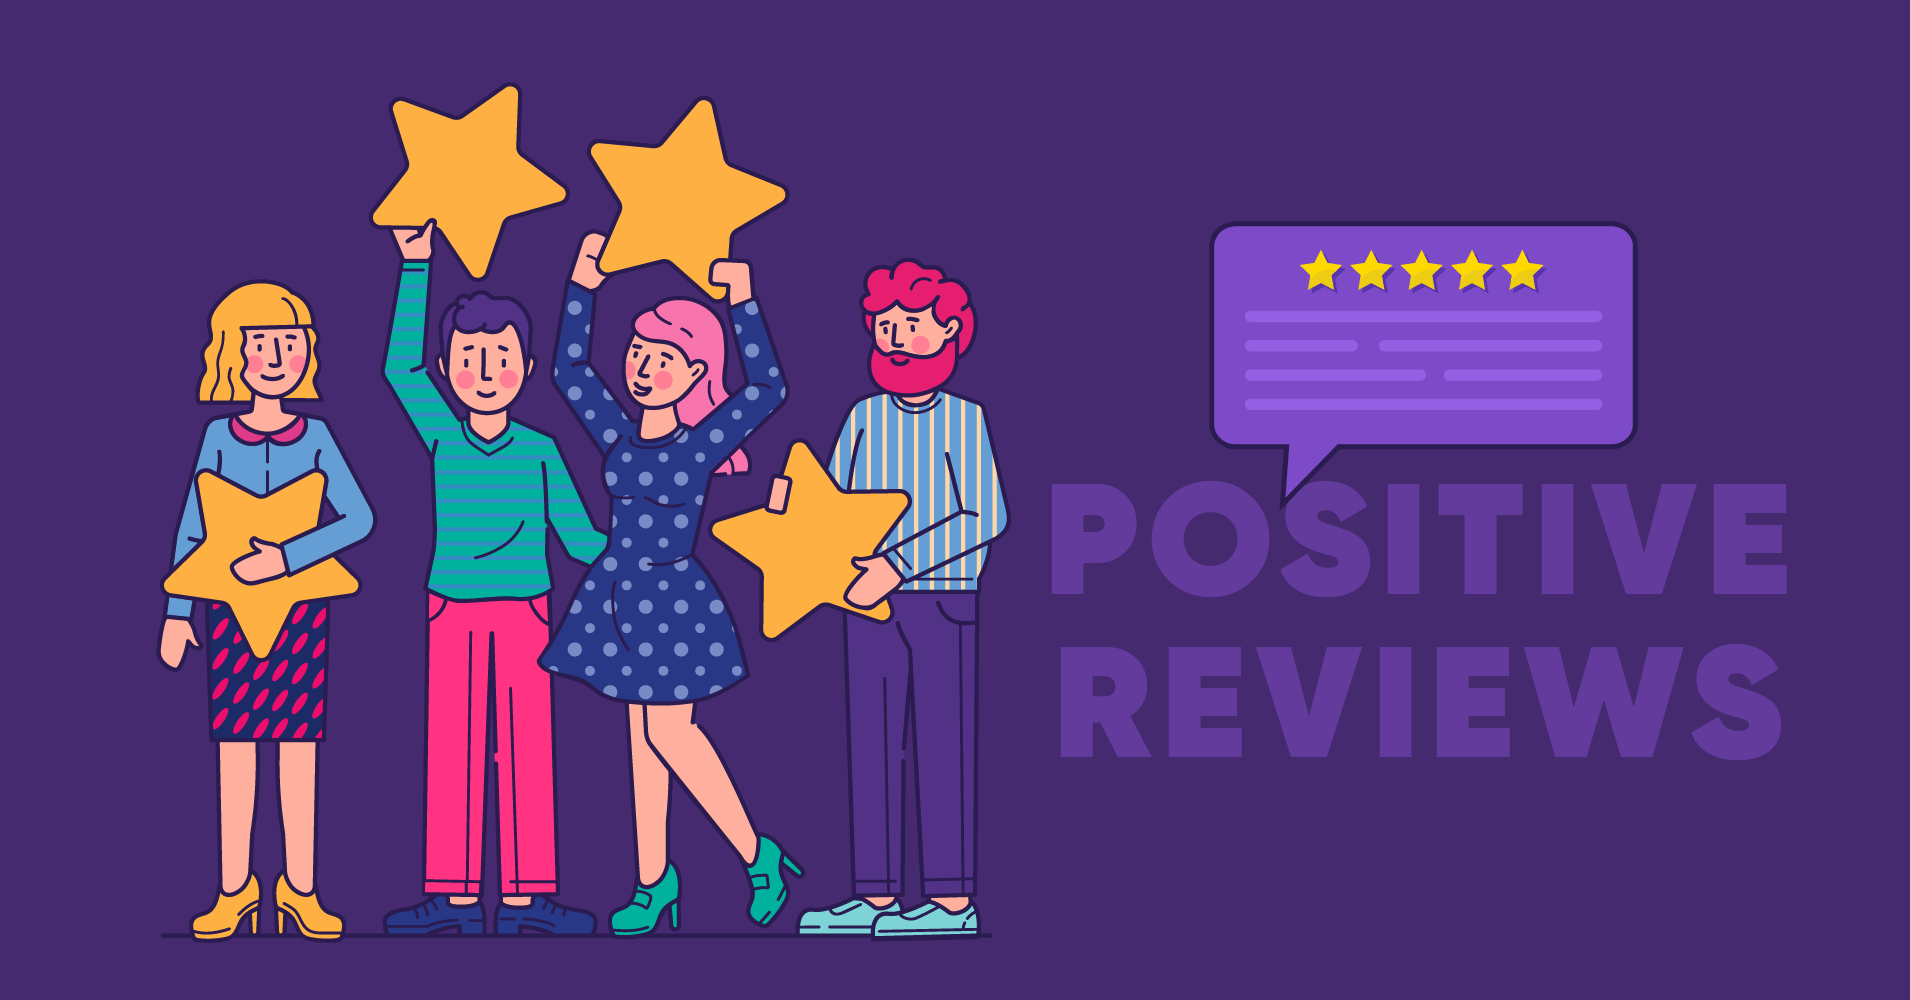 Positive reviews examples